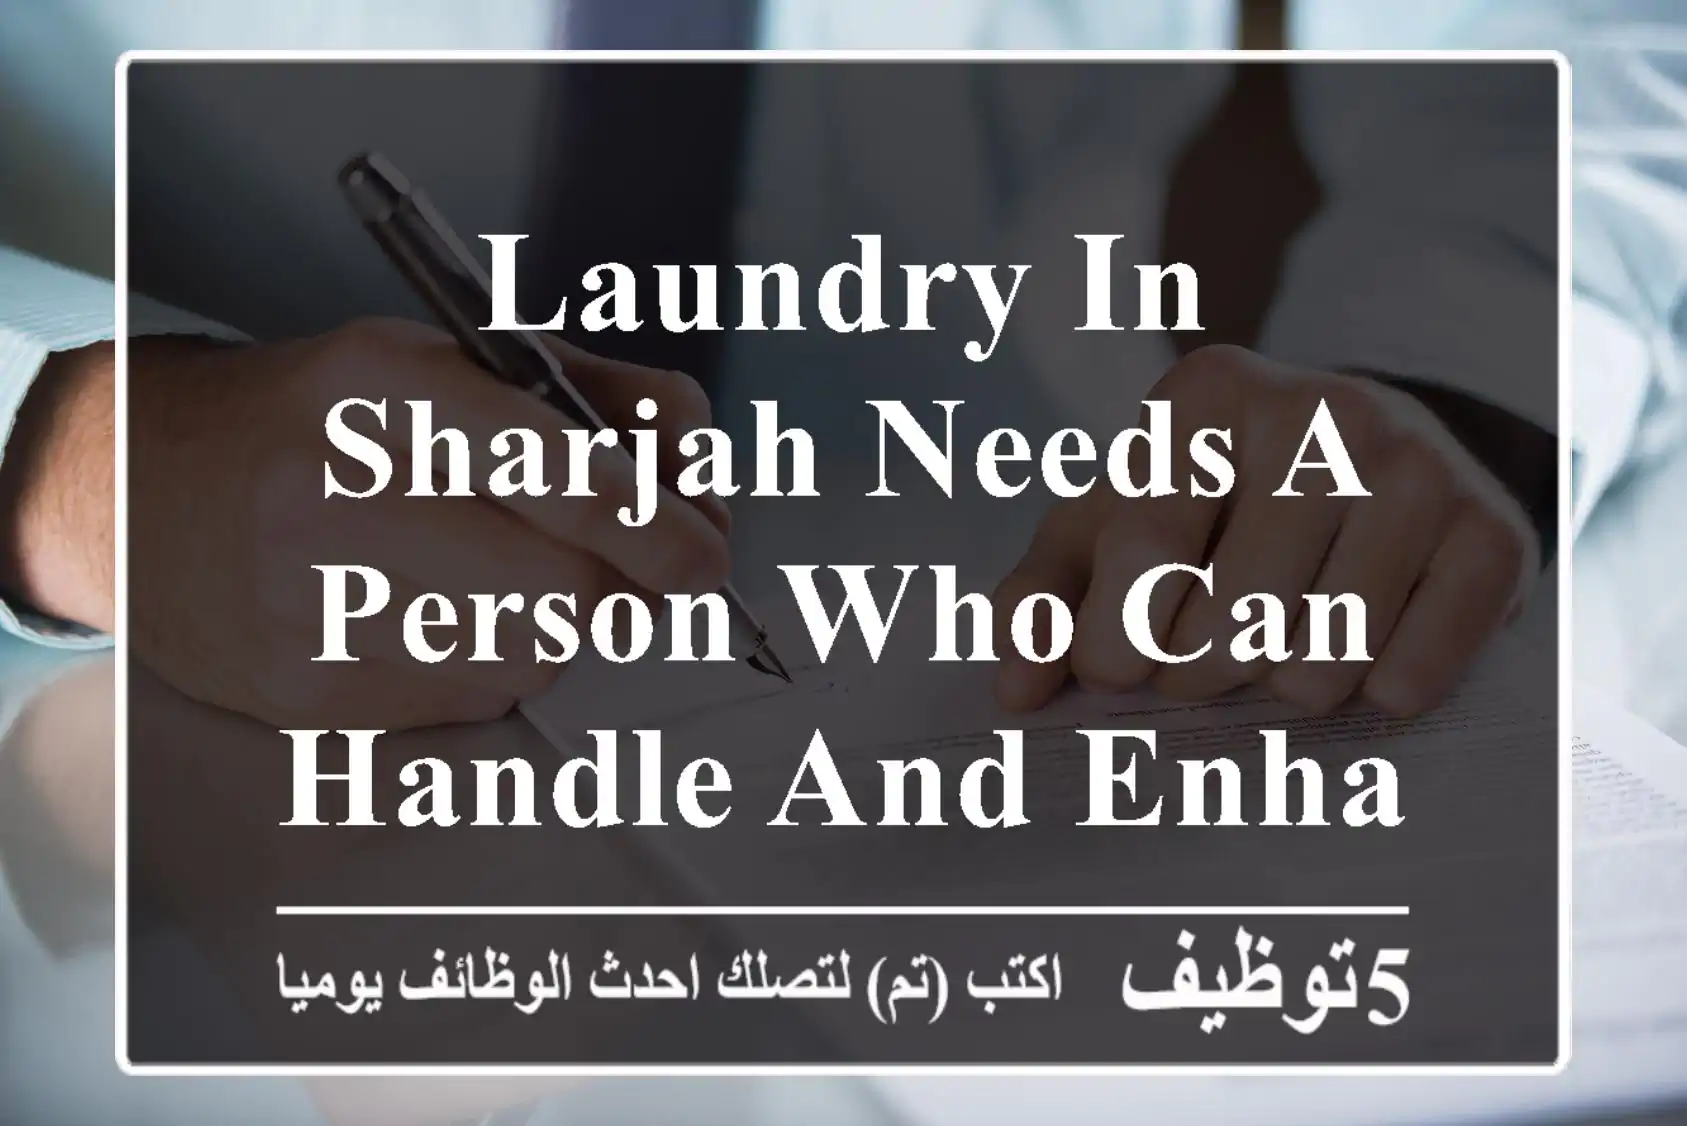 Laundry in Sharjah needs a person who can handle and enhance the performance